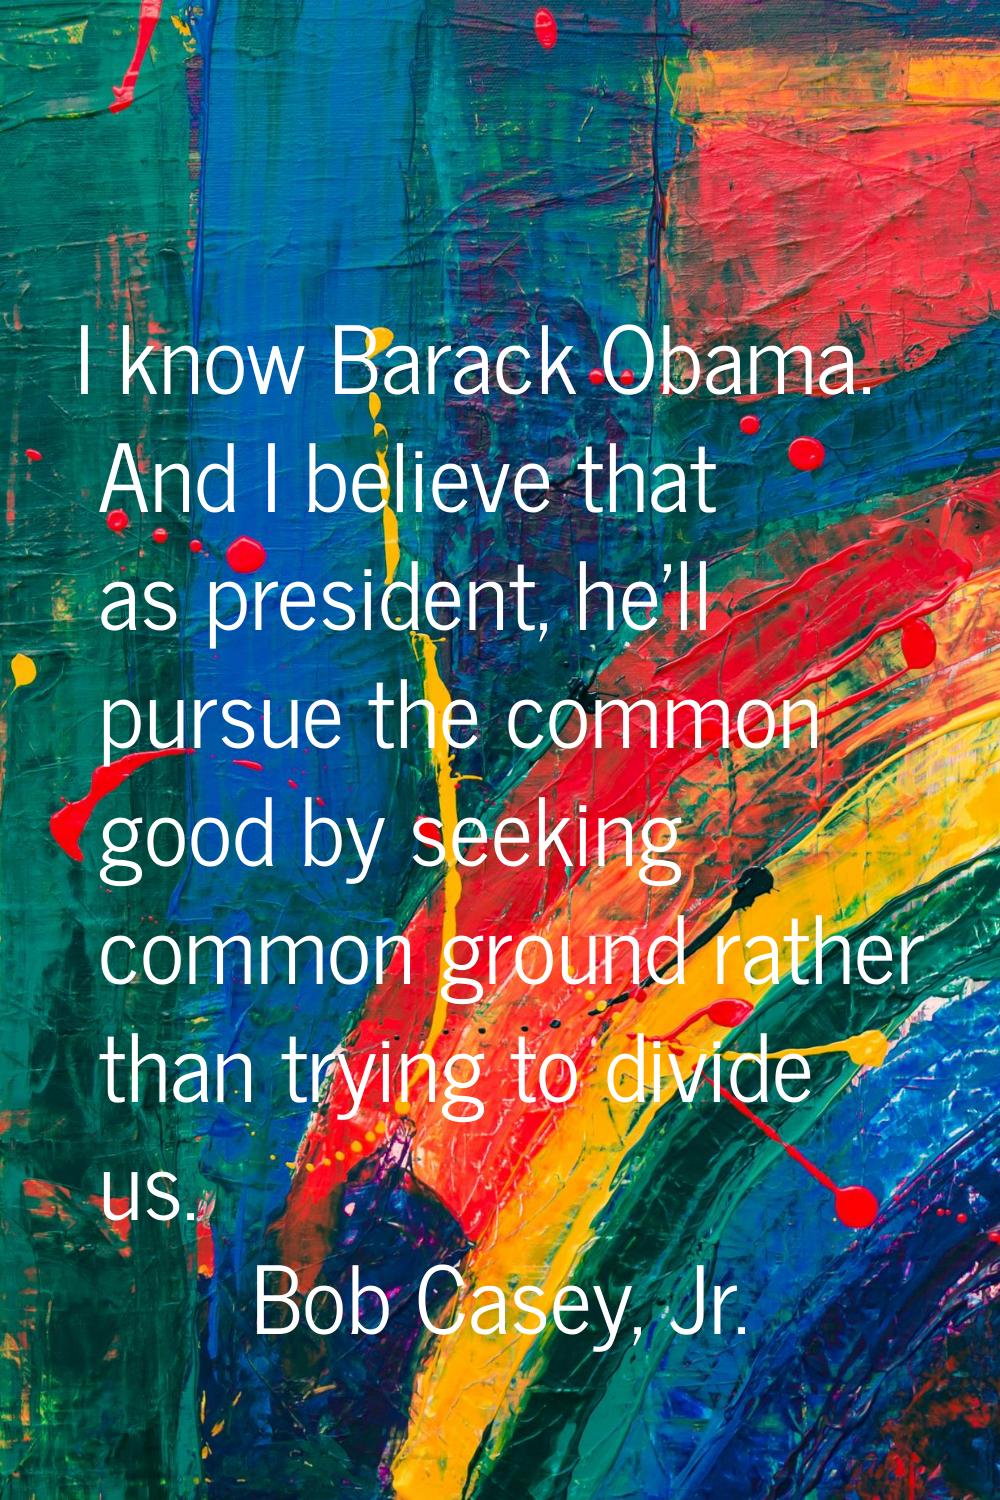 I know Barack Obama. And I believe that as president, he'll pursue the common good by seeking commo